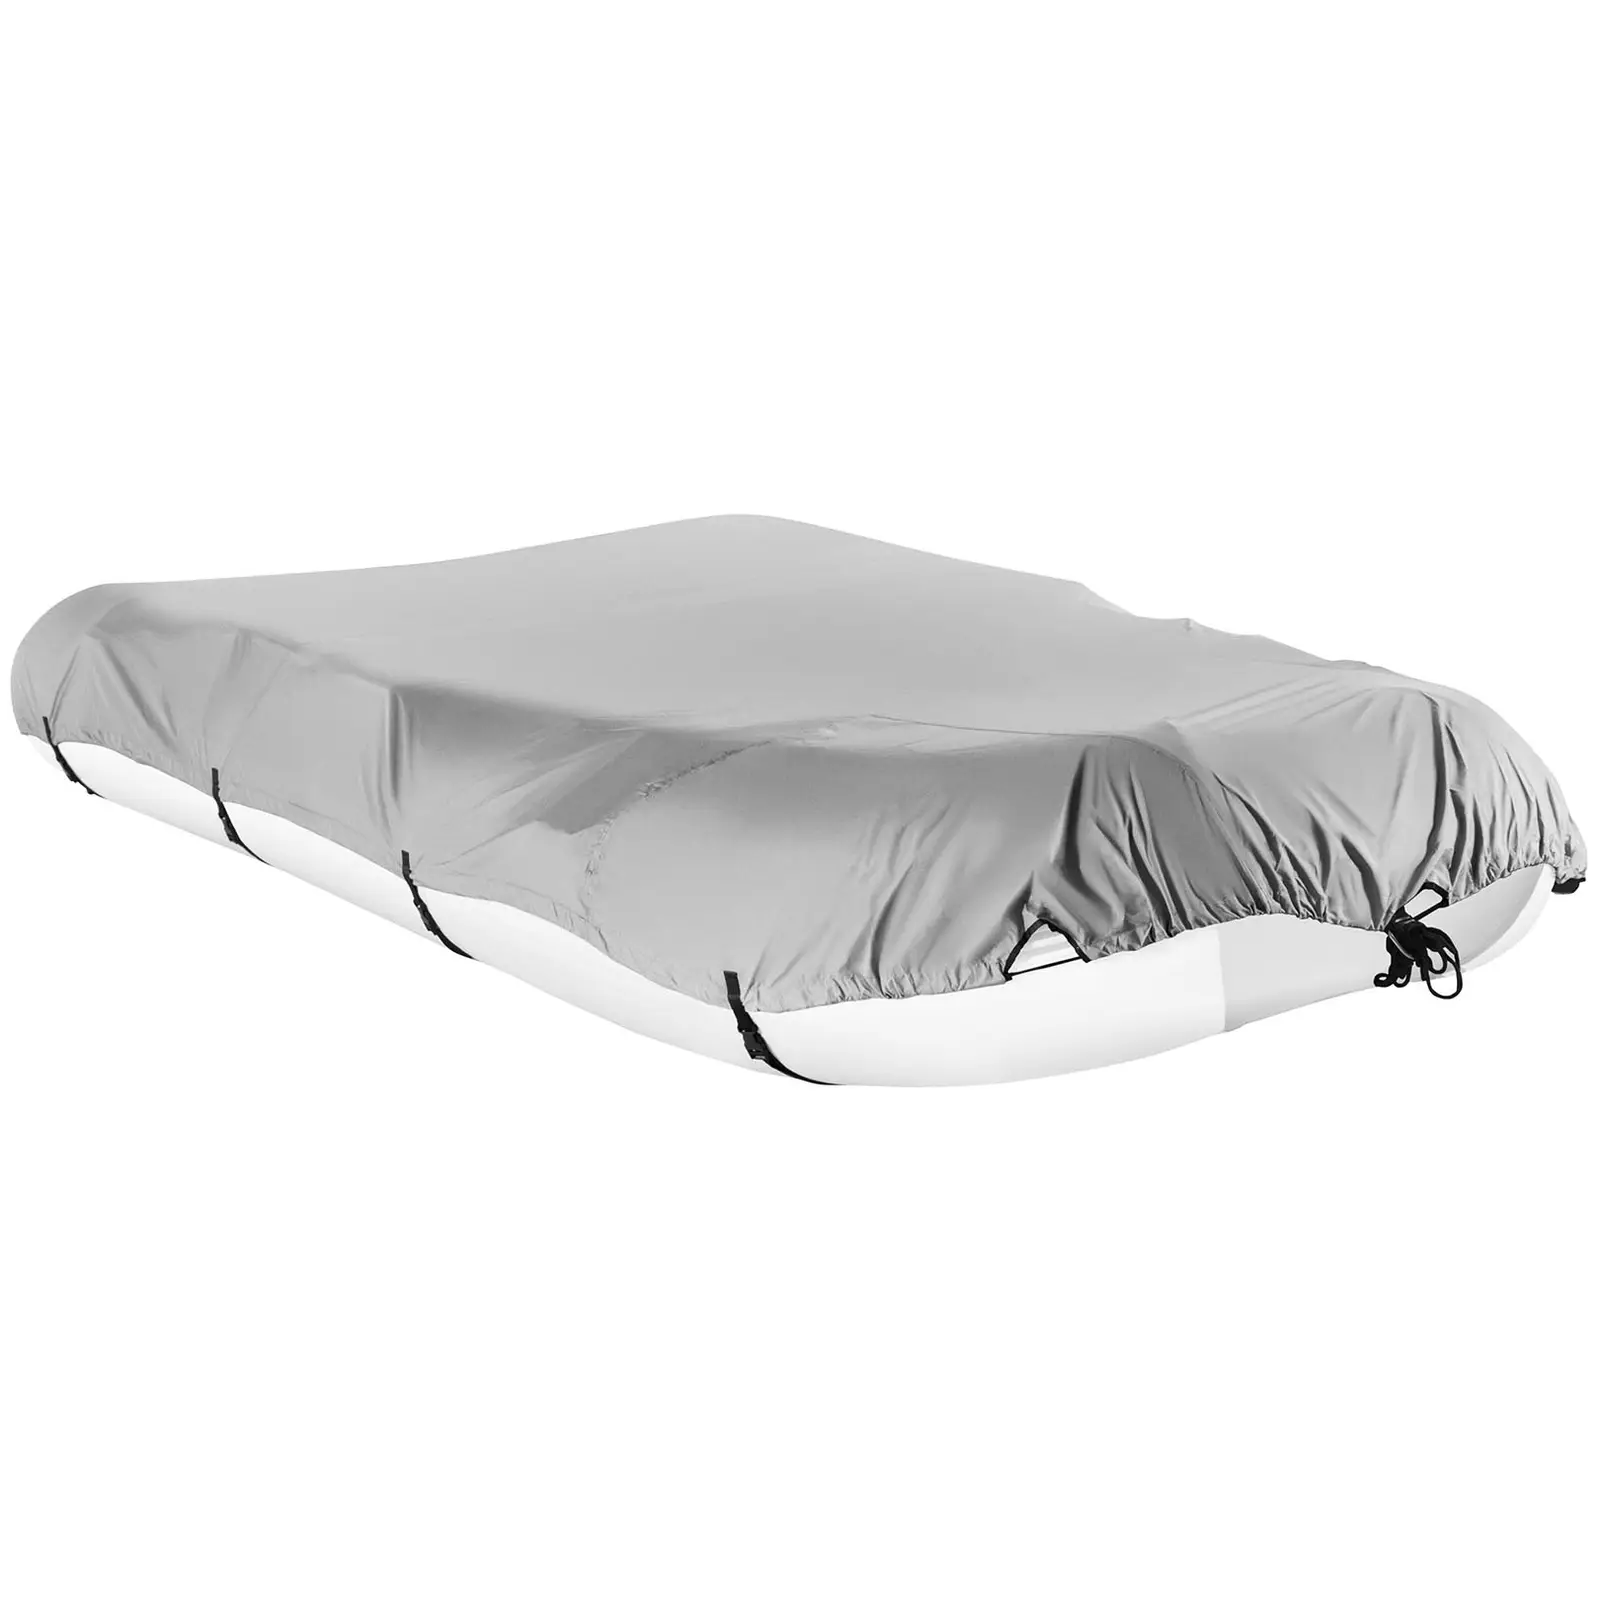 Inflatable Boat Cover - 340 x 180 x 140 cm